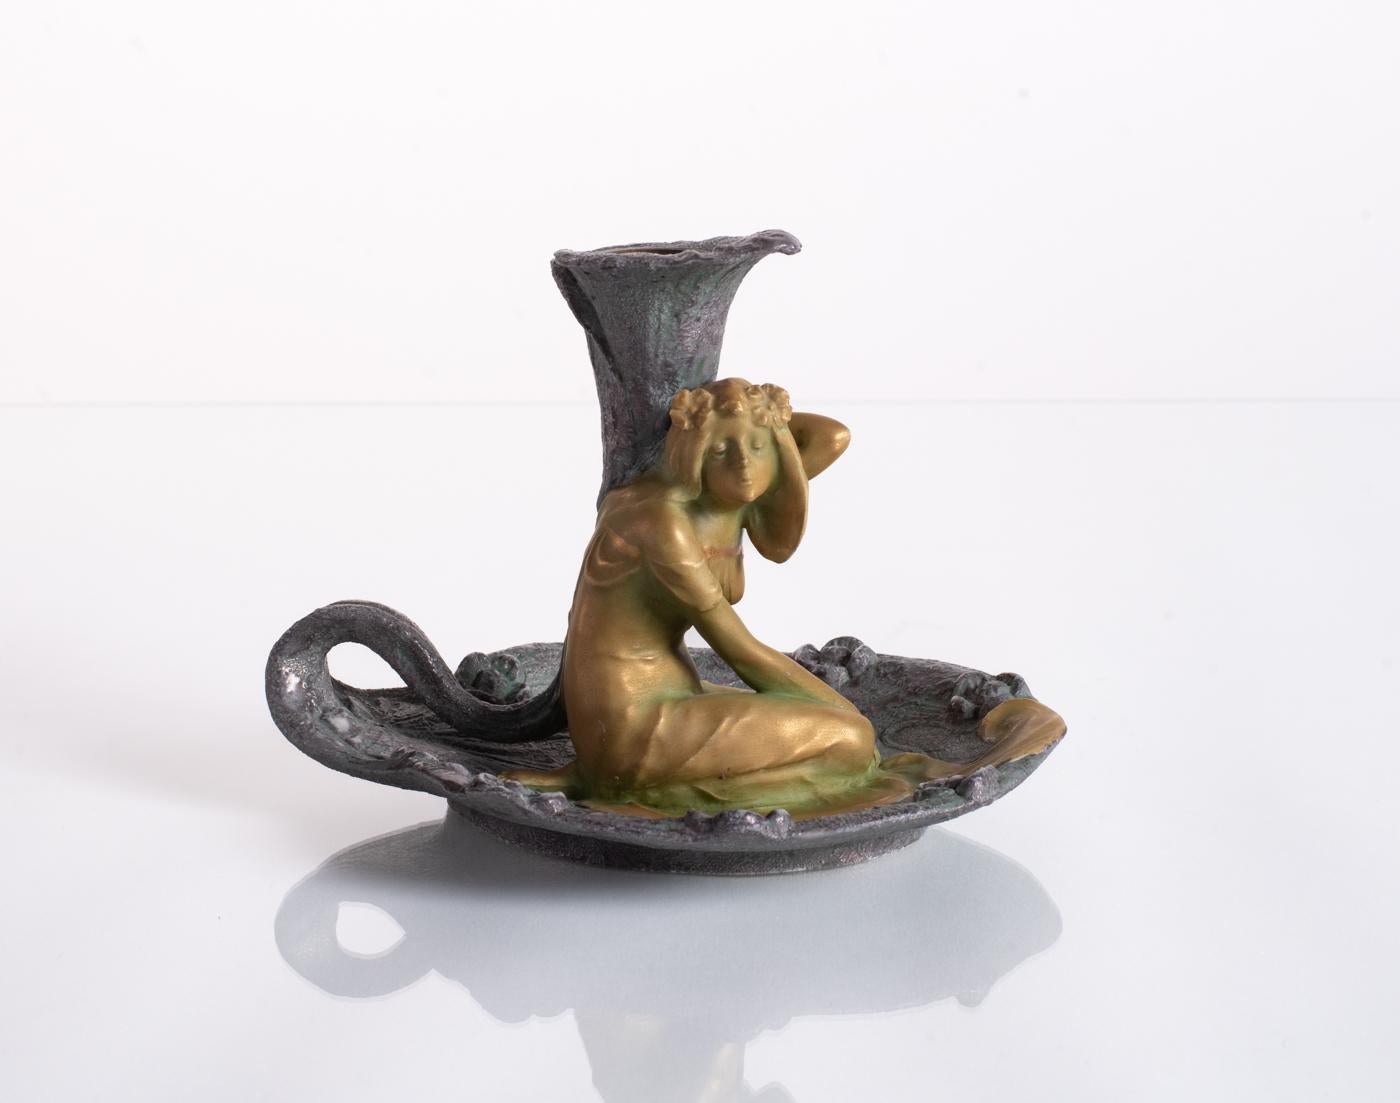 Figural candlestick with a golden maiden on an iridescent form. This ceramic features a beautiful juxtaposition of the smooth texture of the woman against a psychedelic stone-like flowerbed, with an open tulip ready to receive a candle. Stamped